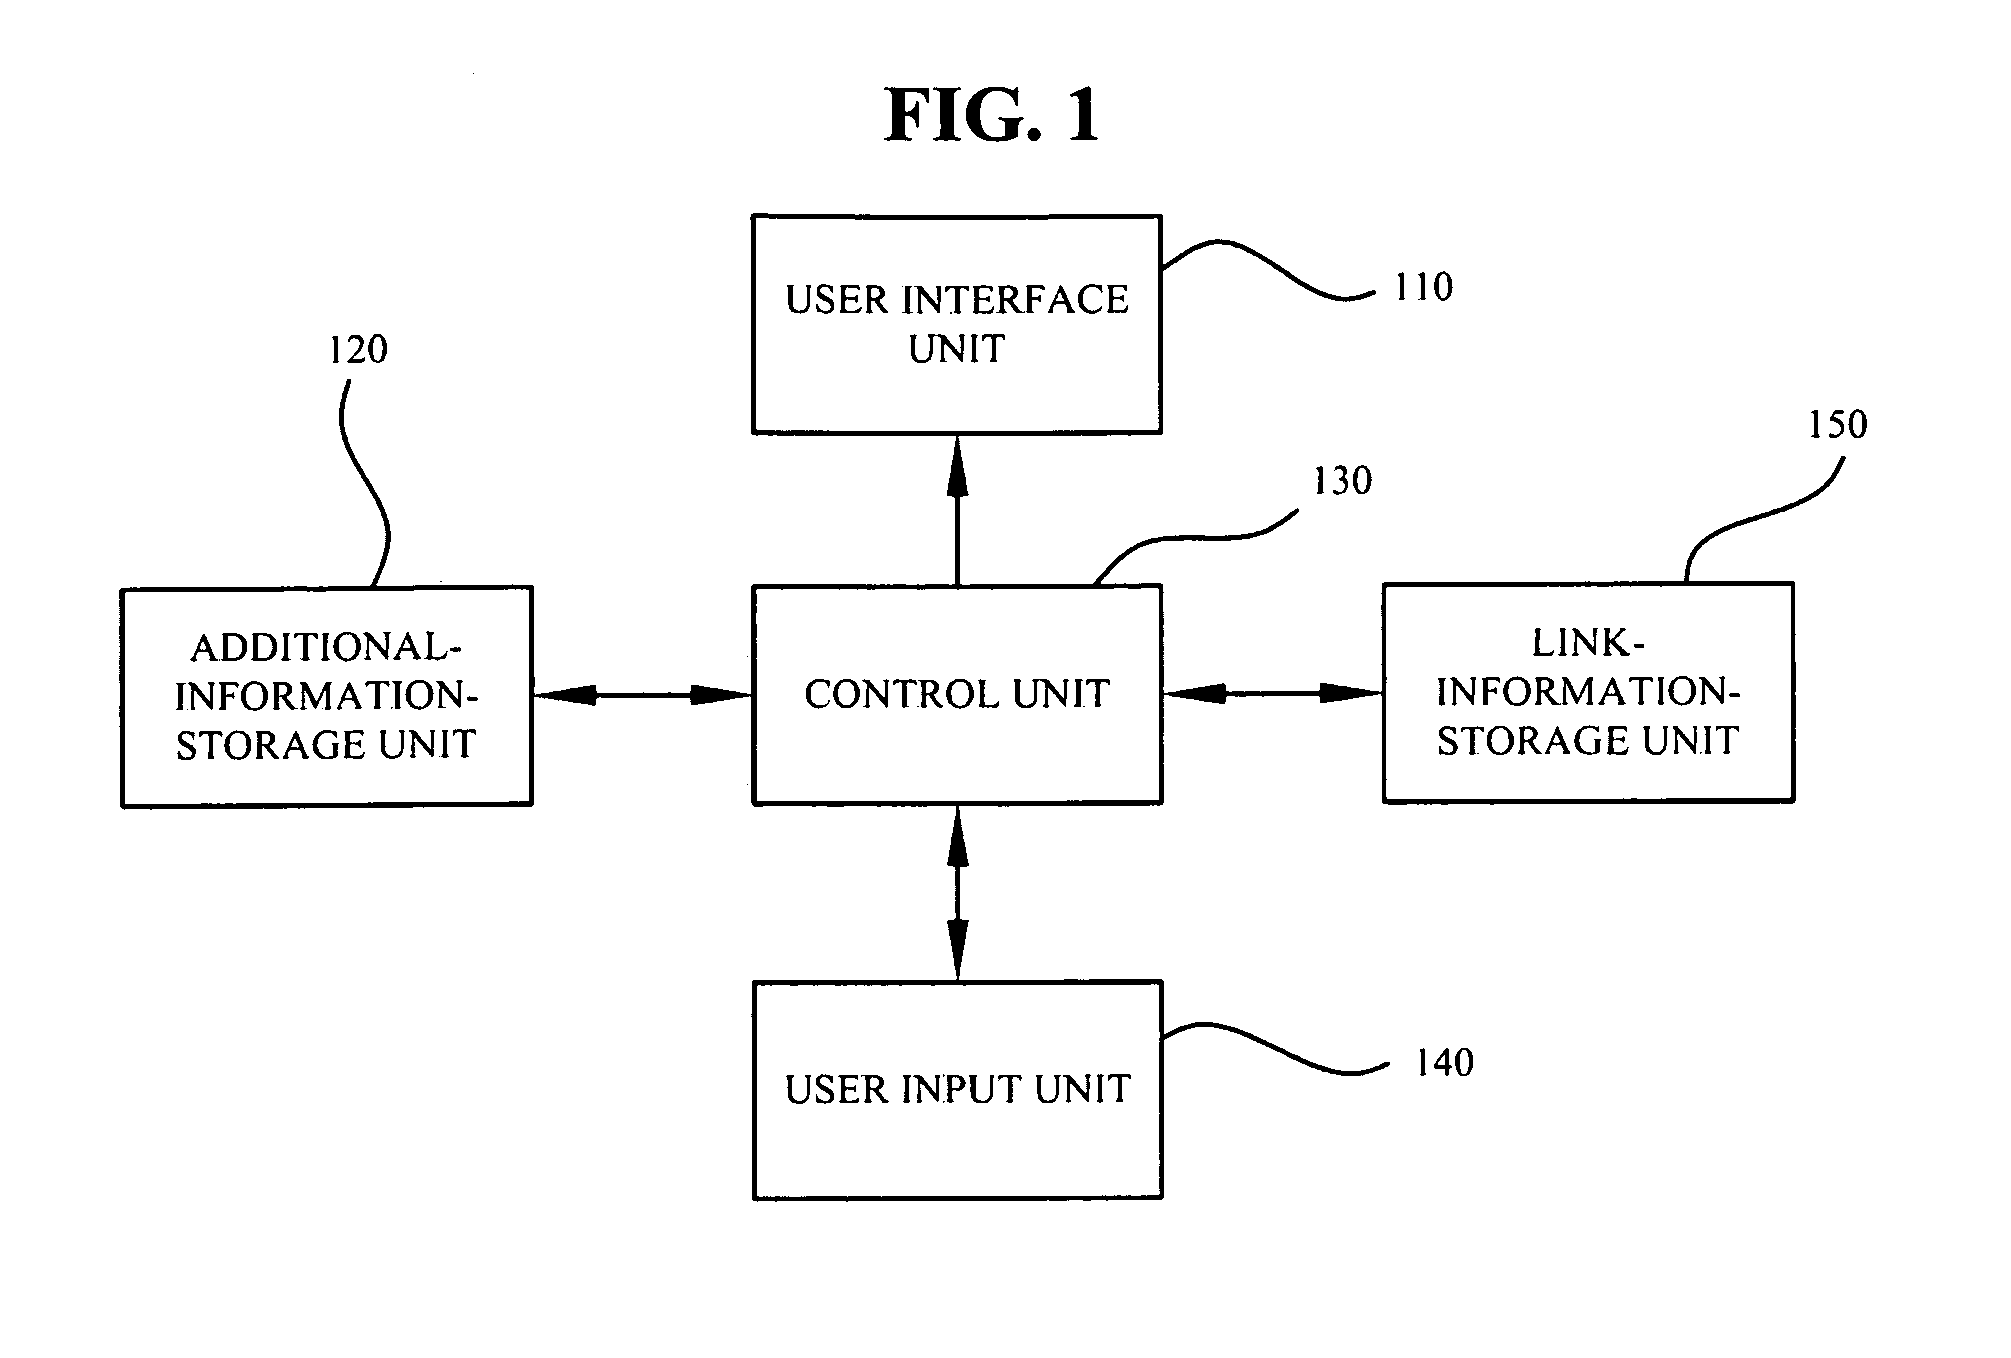 Apparatus and method for providing user interface for file search